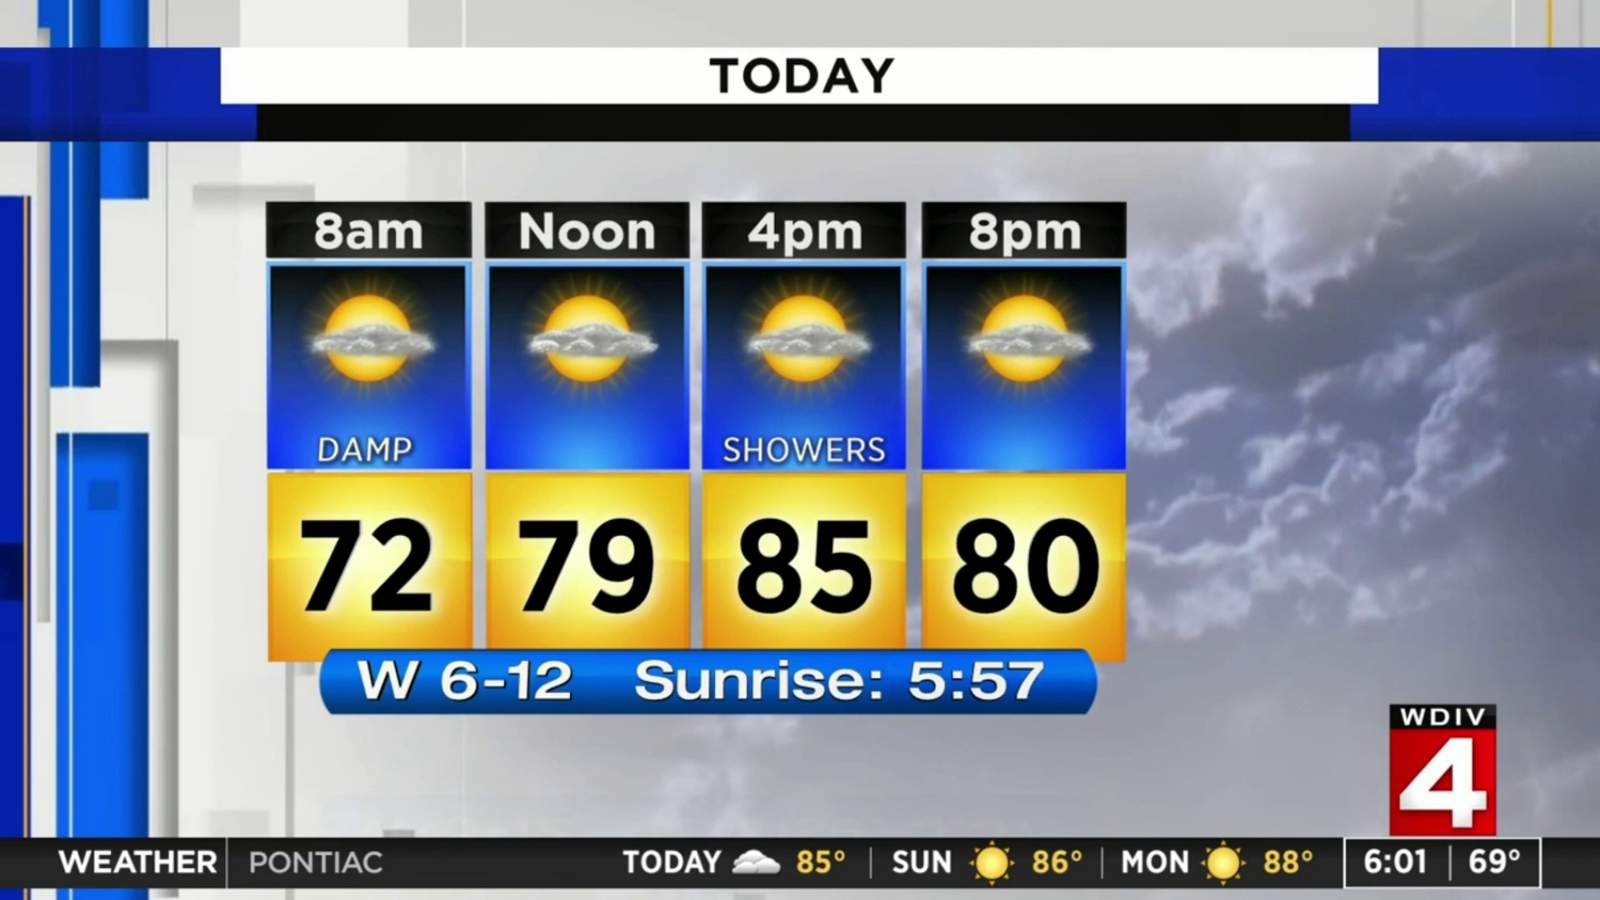 Metro Detroit weather: Warm Saturday with spotty showers